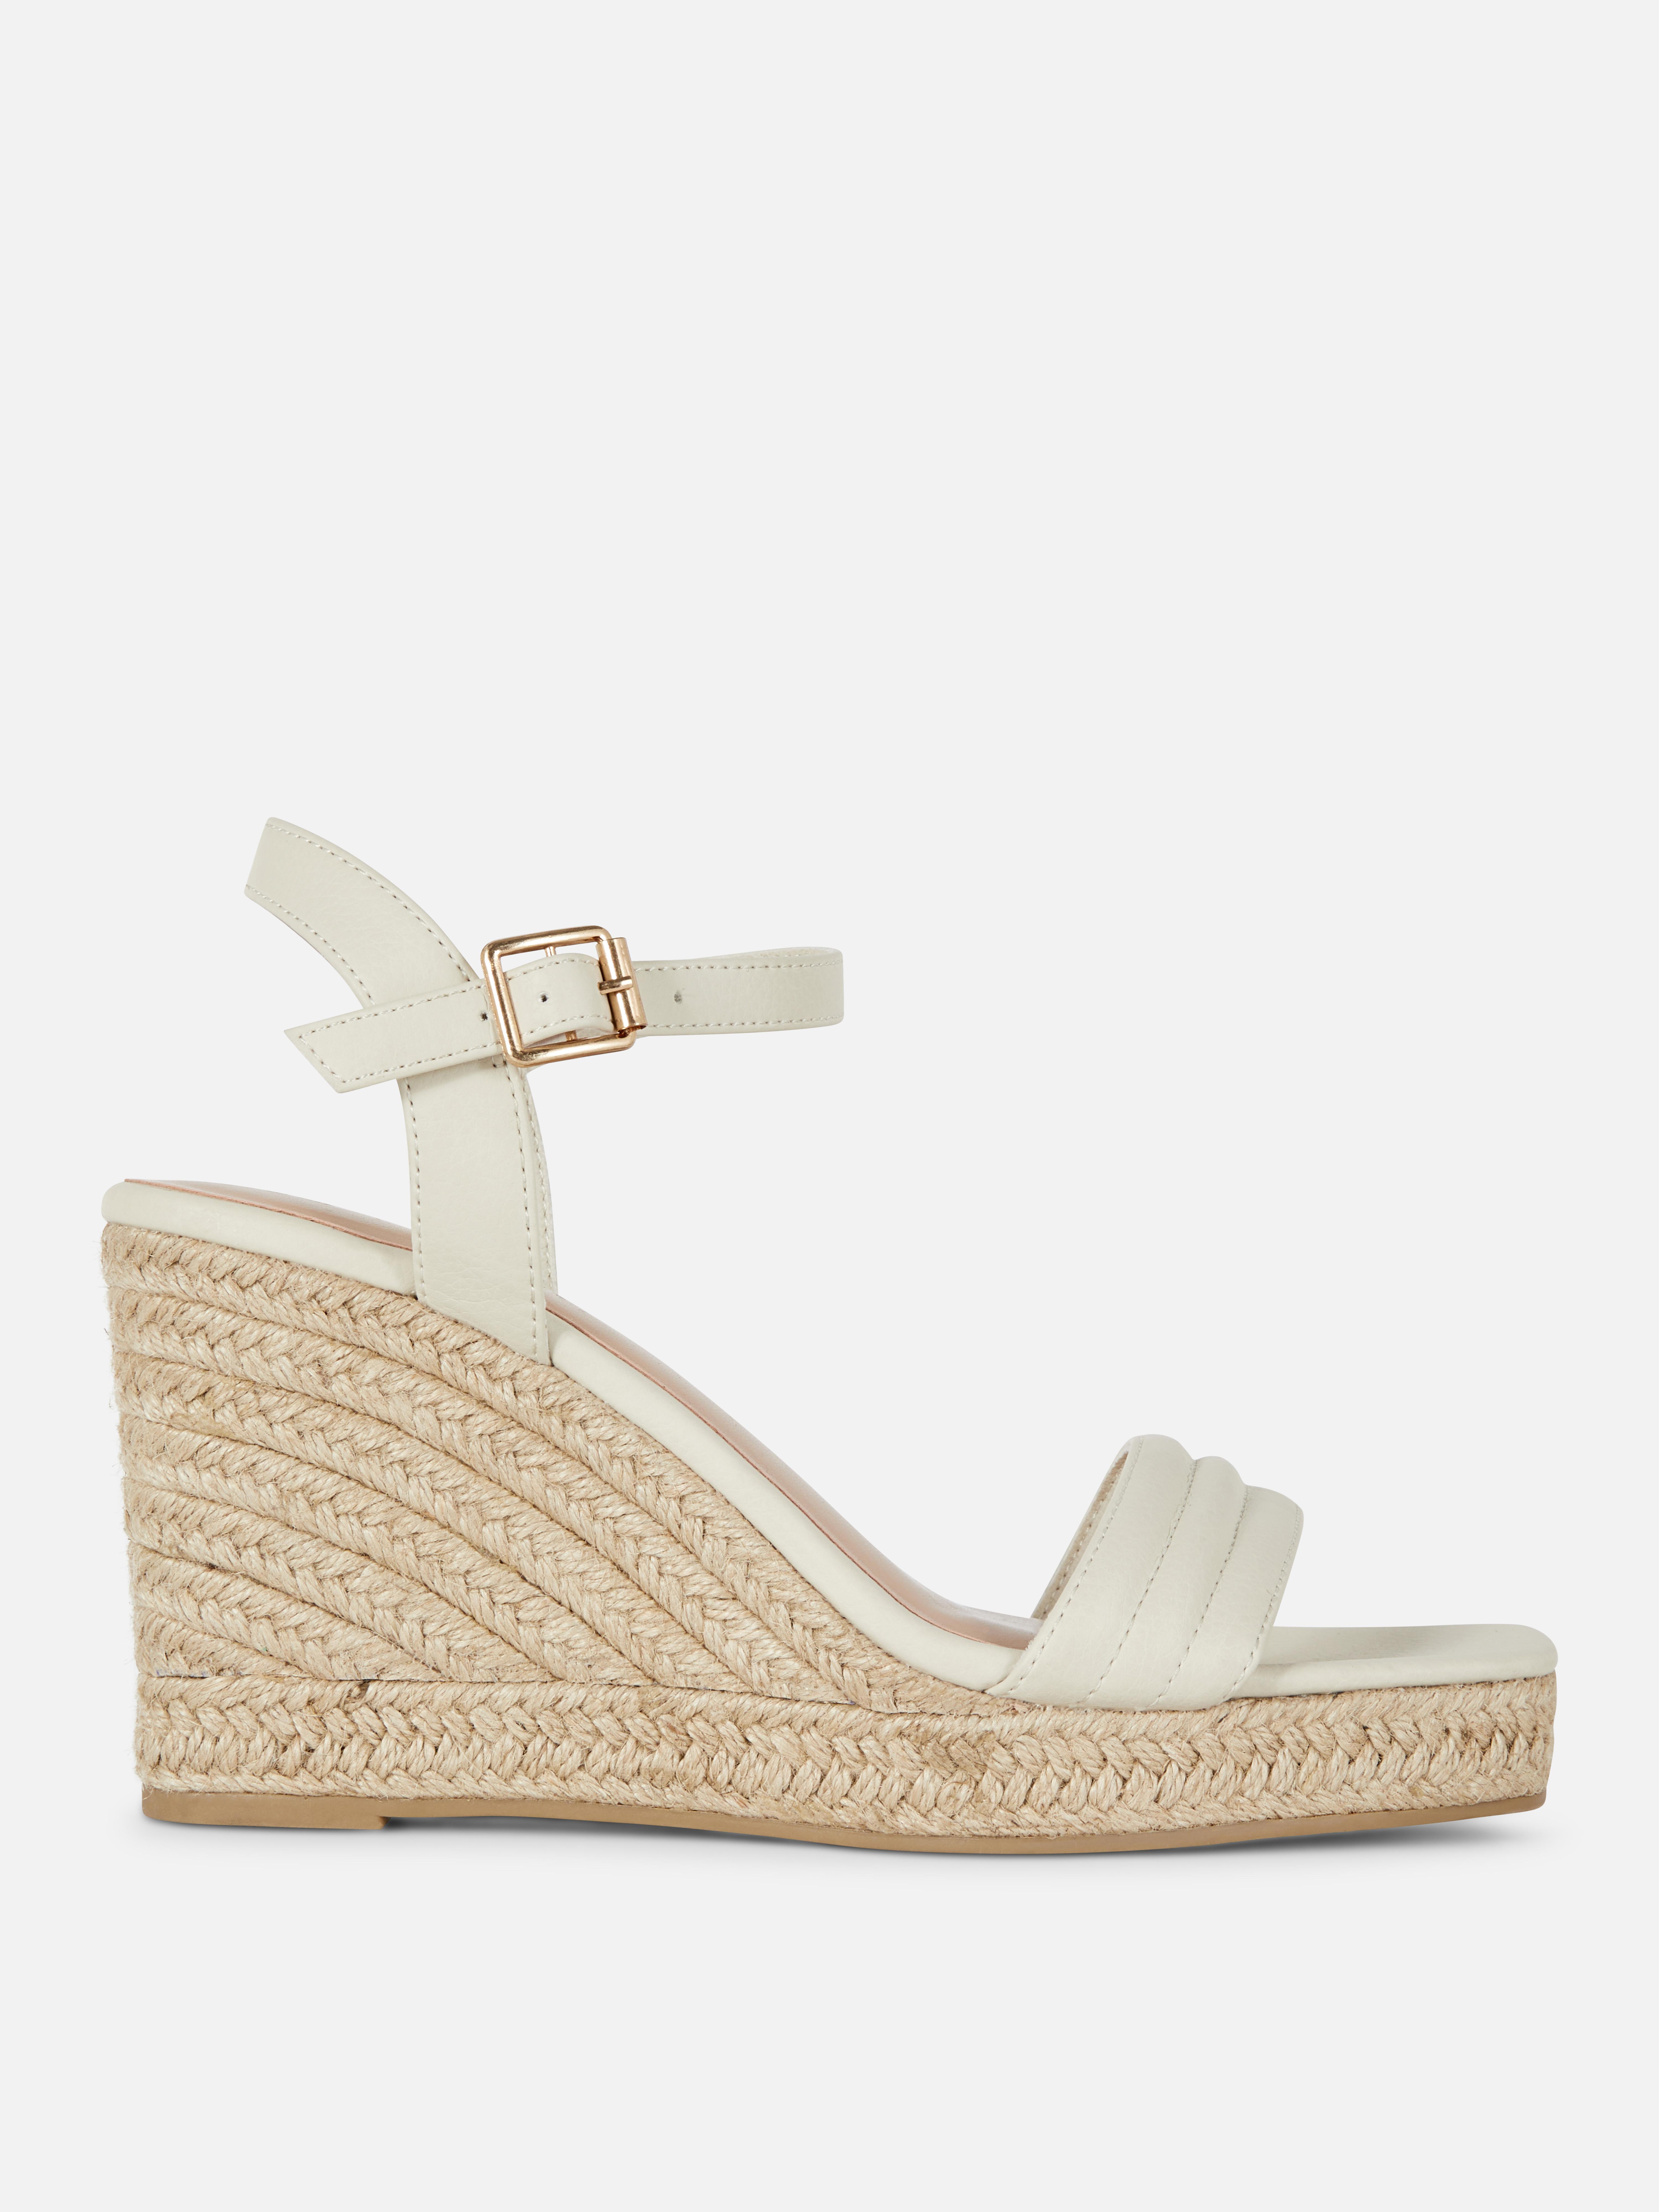 Padded Strap Wedge Sandals